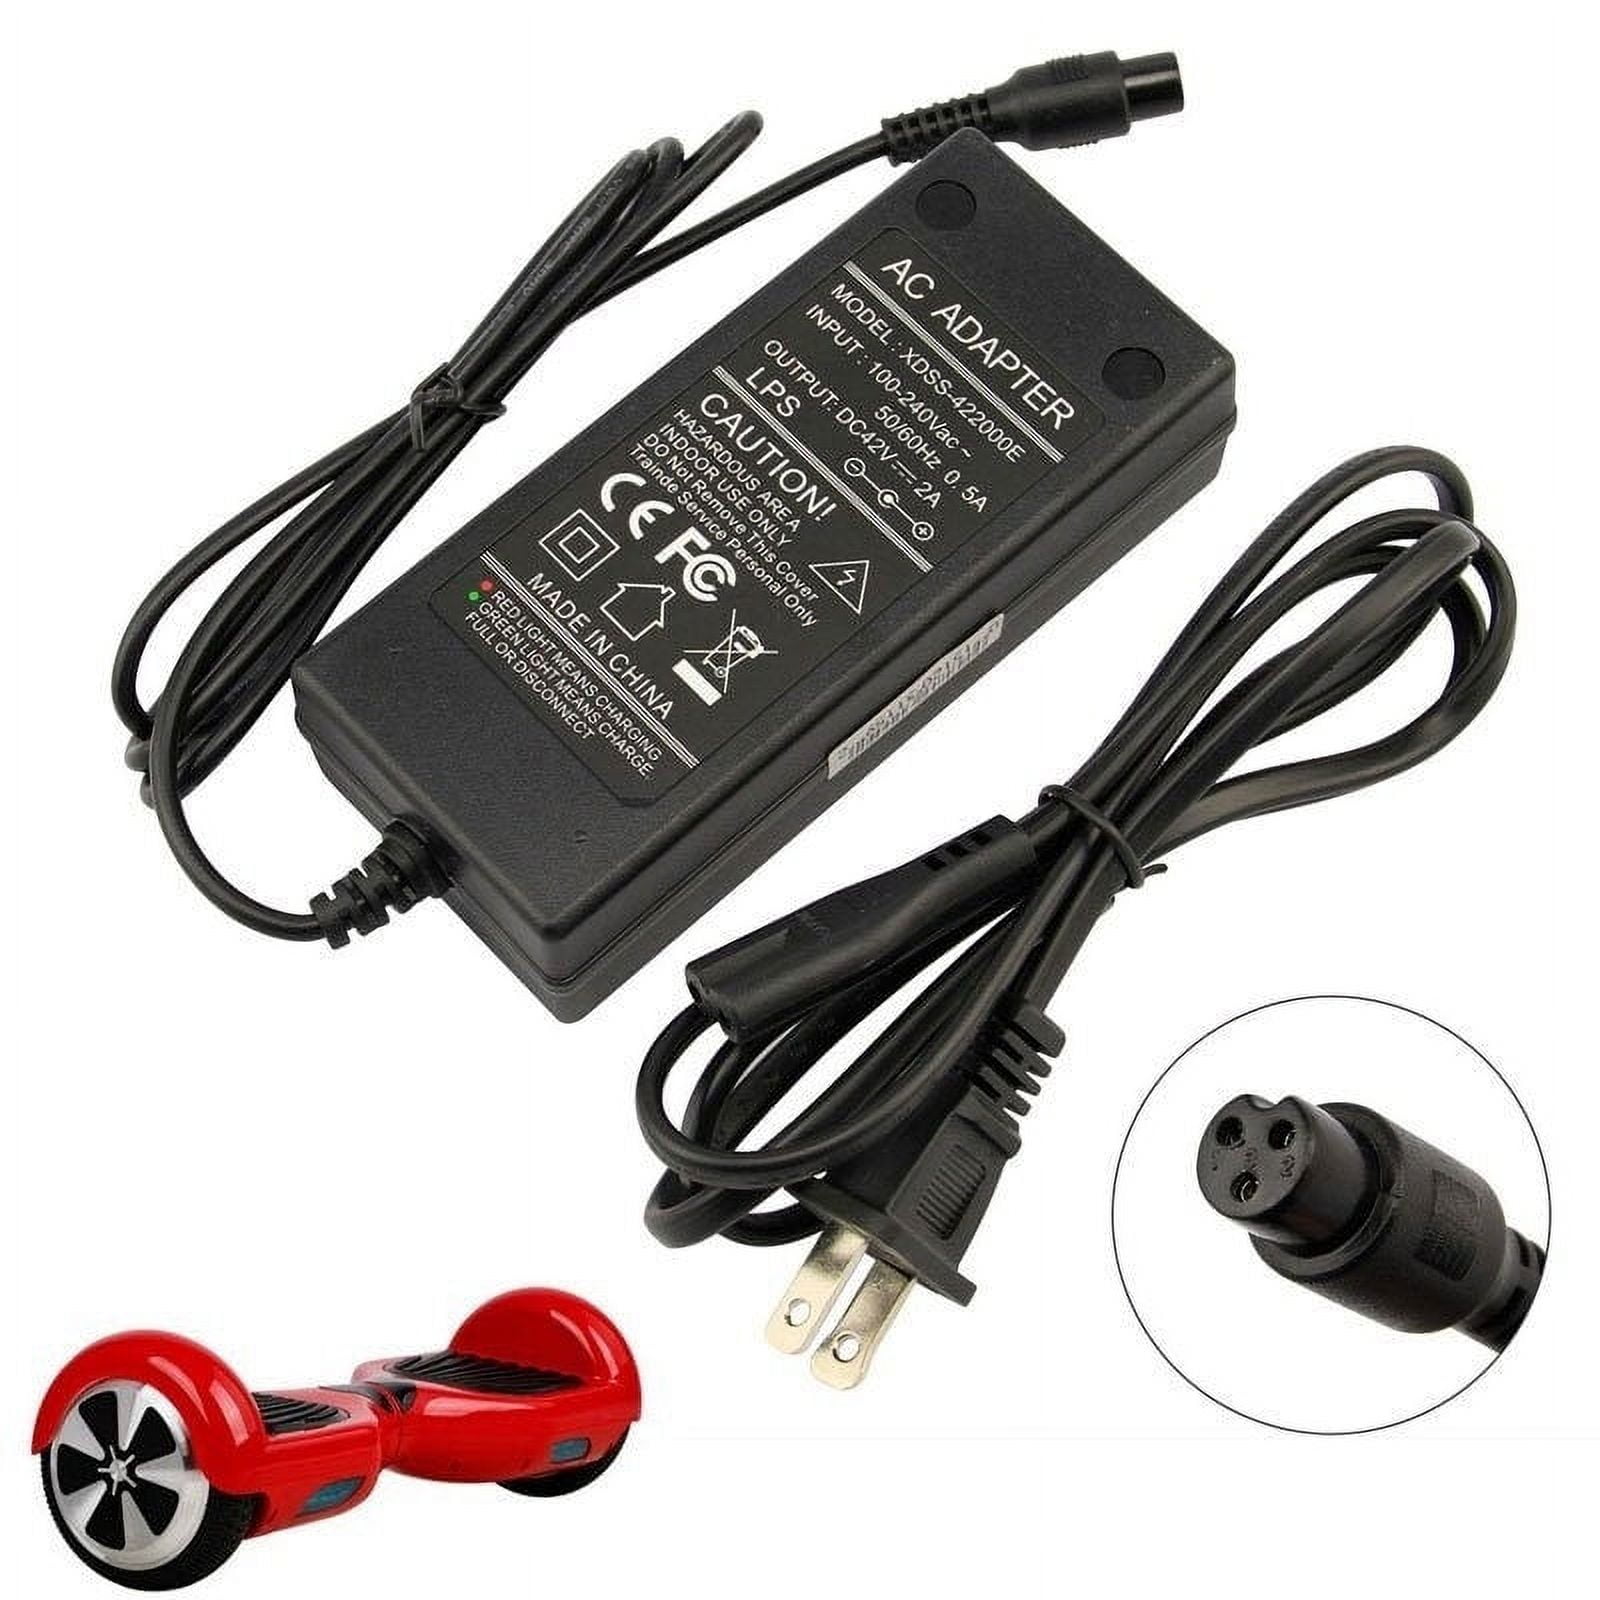 PANDAIN 42V 2A Hoverboard Charger Scooter Charger Universal Power Adapter  Charger for 2 Wheel Self Balancing Hoverboard Scooter, Black